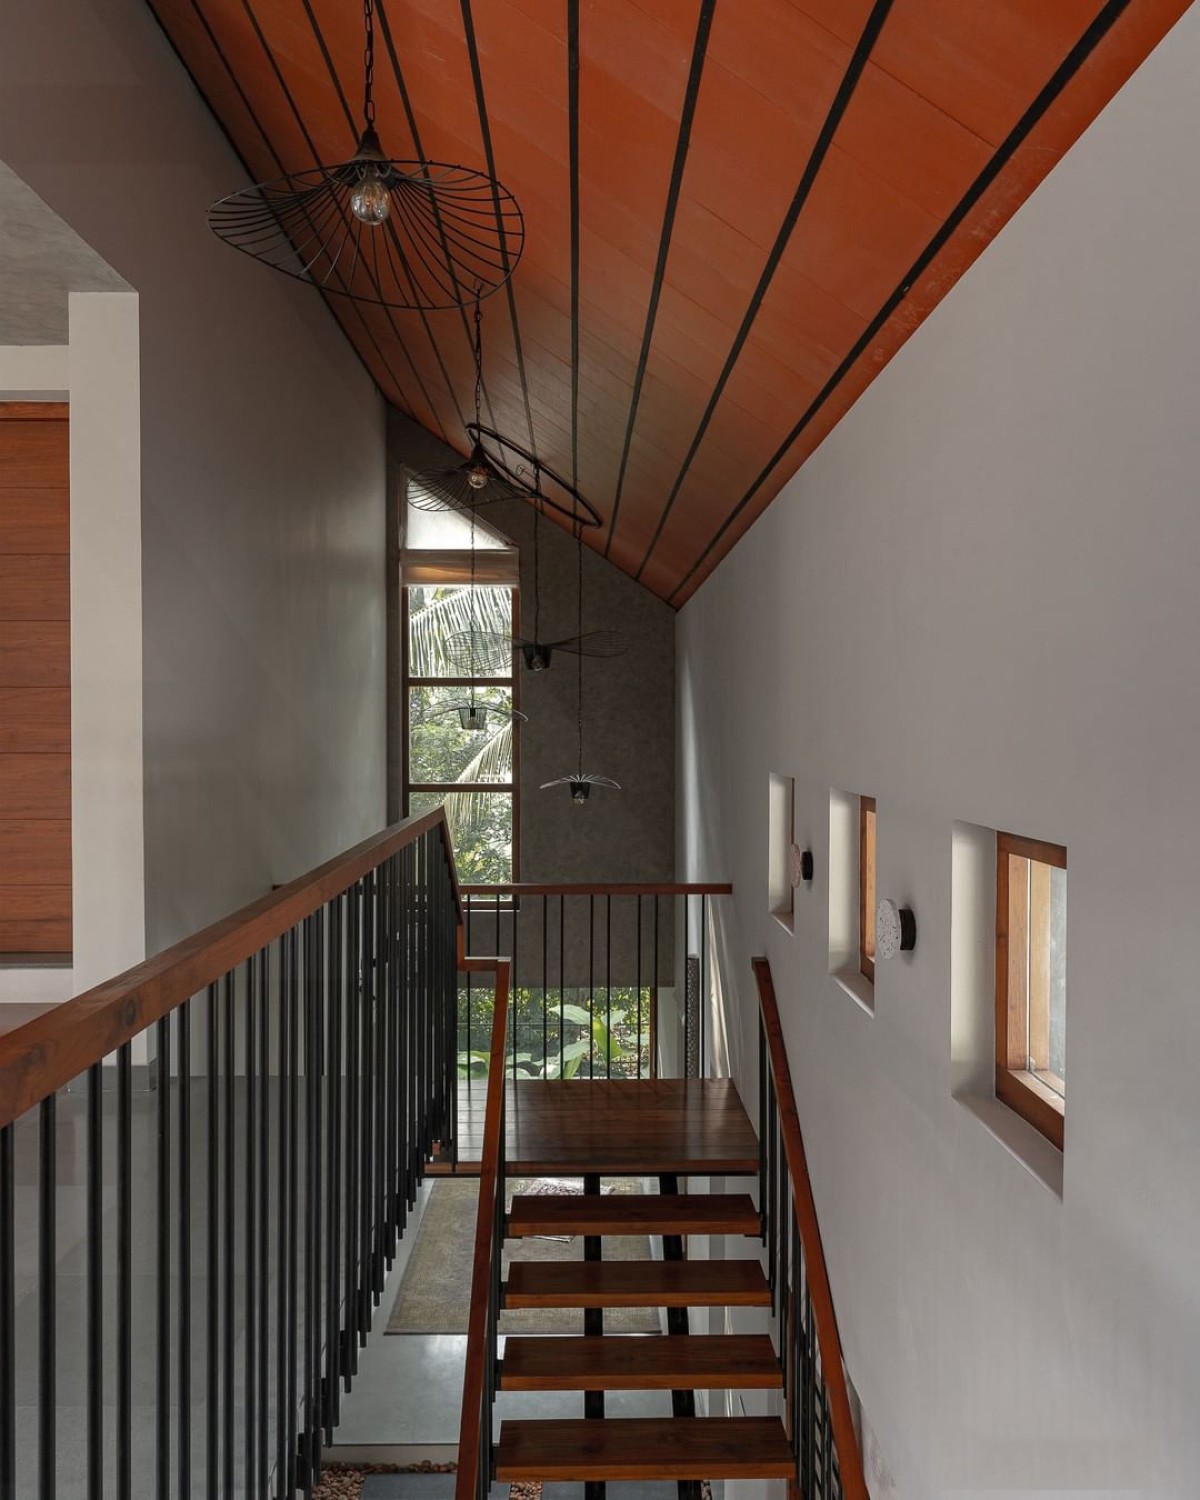 Staircase of Pavilion House by Attiks Architecture